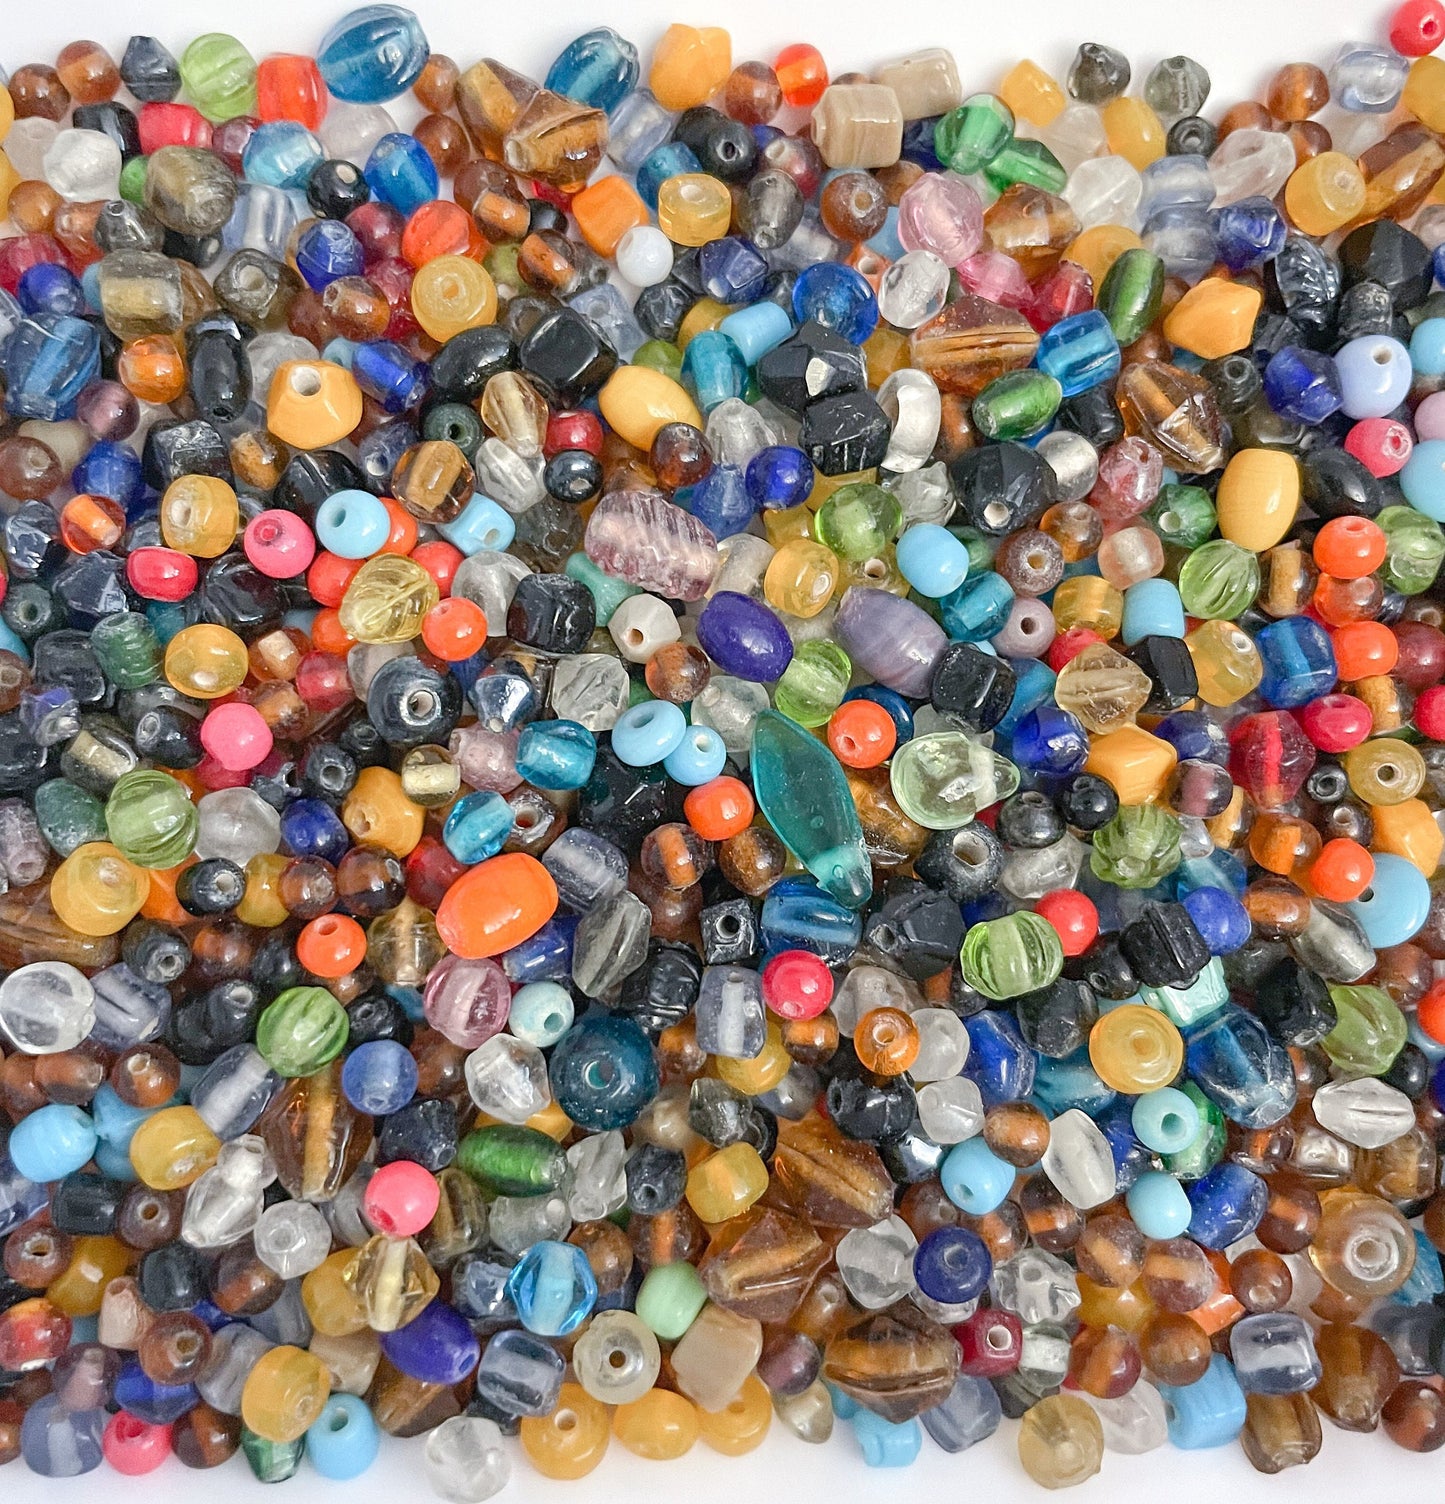 Small Glass Bead Assorted Variety Mix of Colors, Shapes, and Sizes 3-6mm